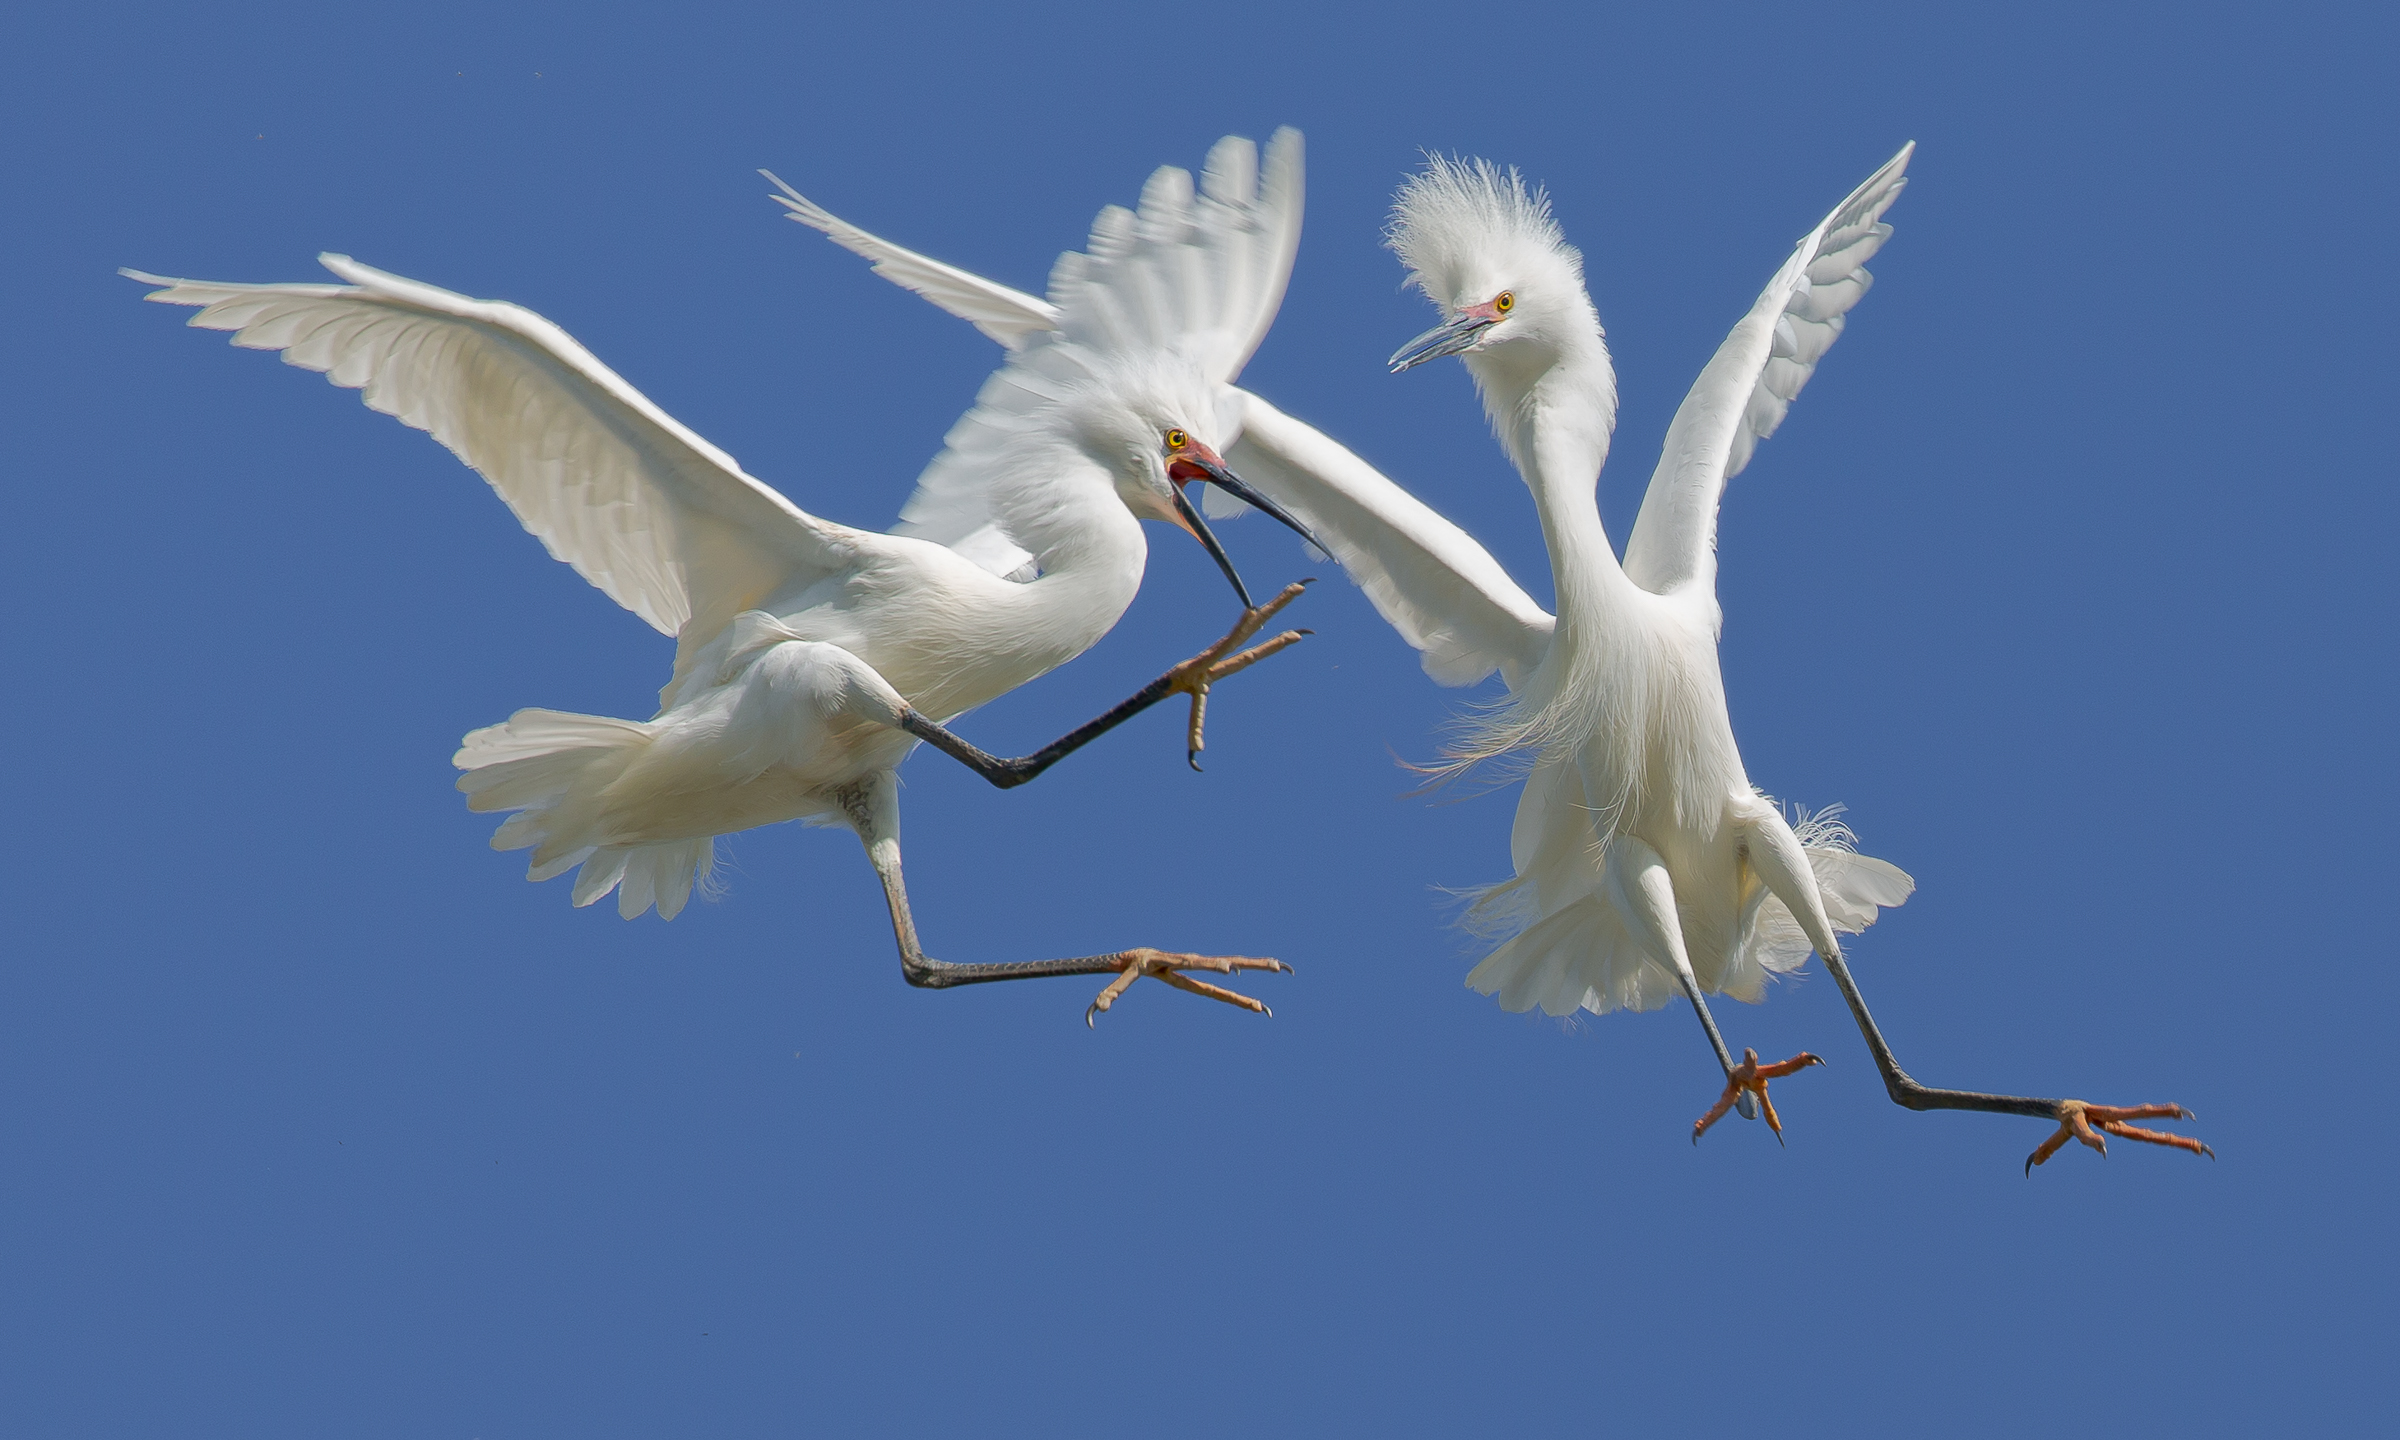 Snowy egrets fighting for the honors of a most beautiful mate. Only one will become a suitor. 
Canon Mark III  100-400